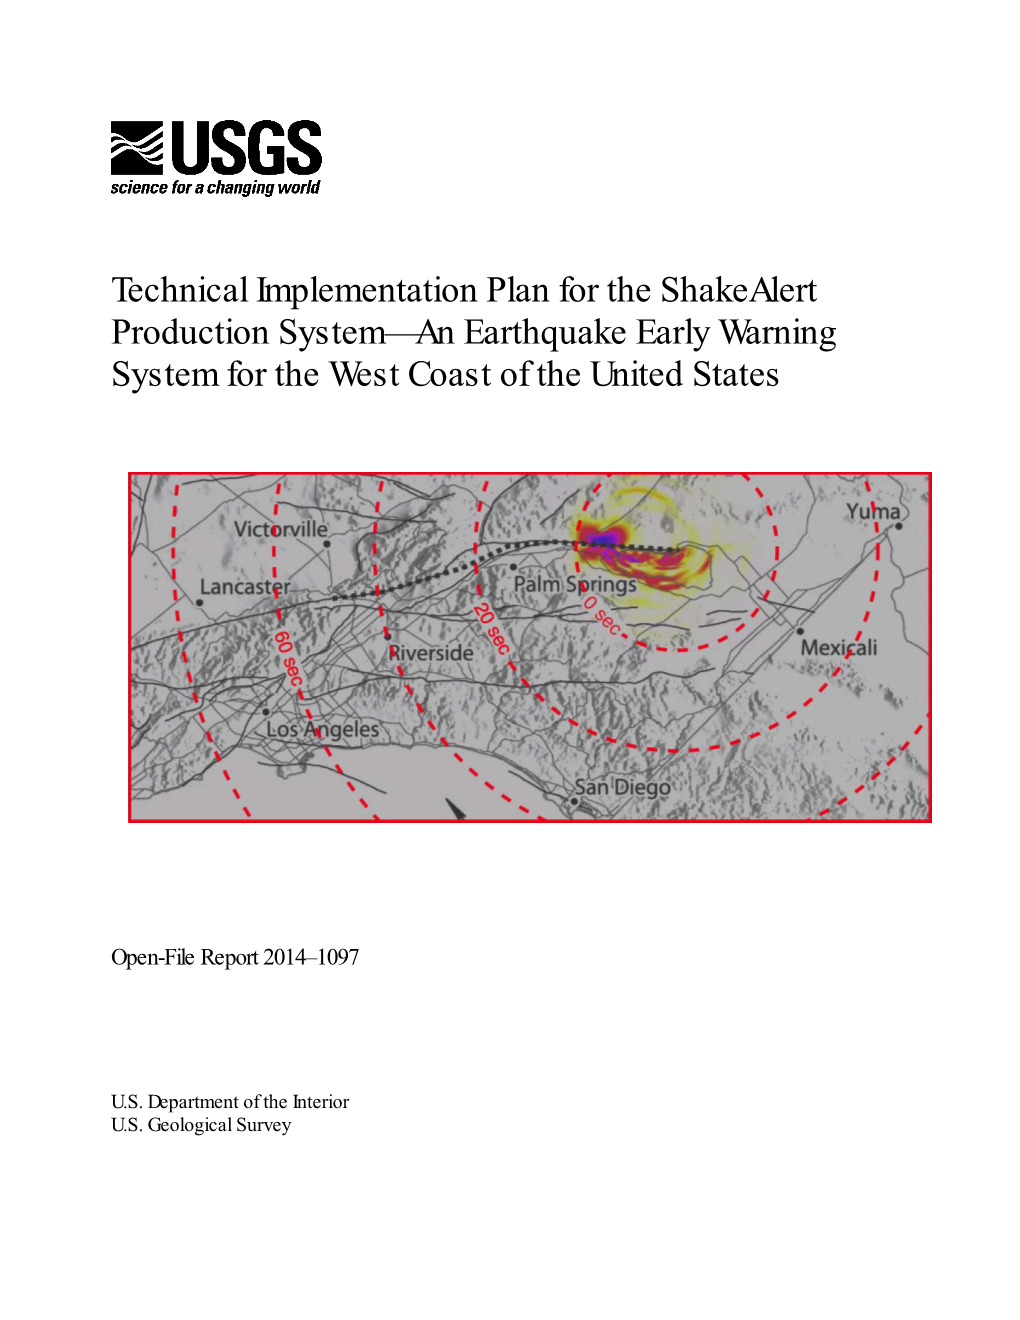 An Earthquake Early Warning System for the West Coast of the United States